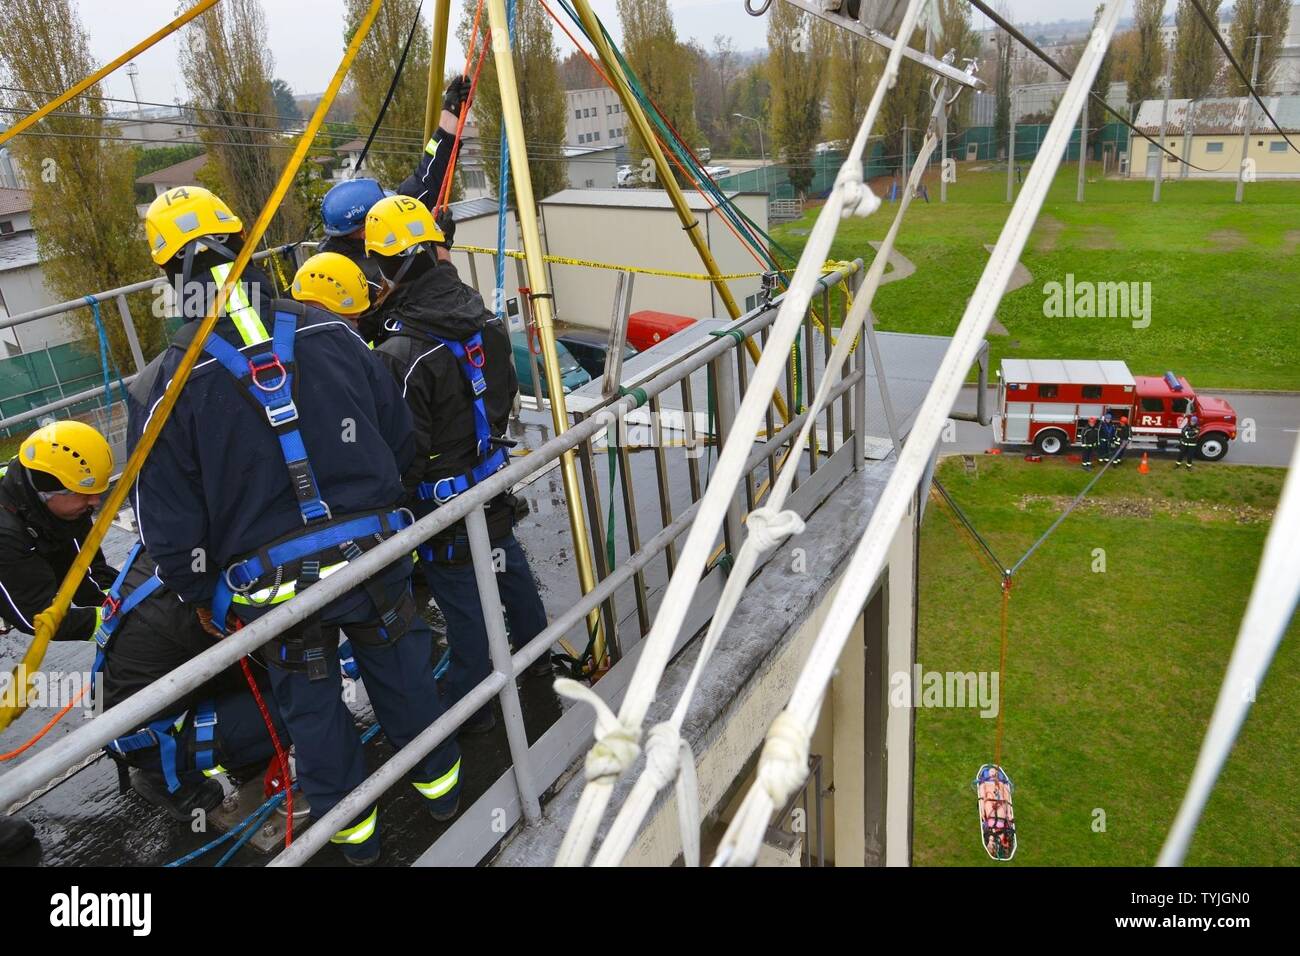 Firefighters assigned to the U.S. Army Garrison Italy, use rope work and knot tying techniques to ascend and extract a simulated injured victim at the Army Training Command tower, 34-feet high, during Department of Defense Technical Rope Rescue 1, Caserma Ederle, Vicenza, Italy, Nov. 11, 2016. Firefighters here received training from instructors from the 435th Construction and Training Squadron, Ramstein Air Base, Germany, on a variety of rescue techniques and scenarios including operational risk management, incident management system, ground support for helicopter operations and confined spac Stock Photo